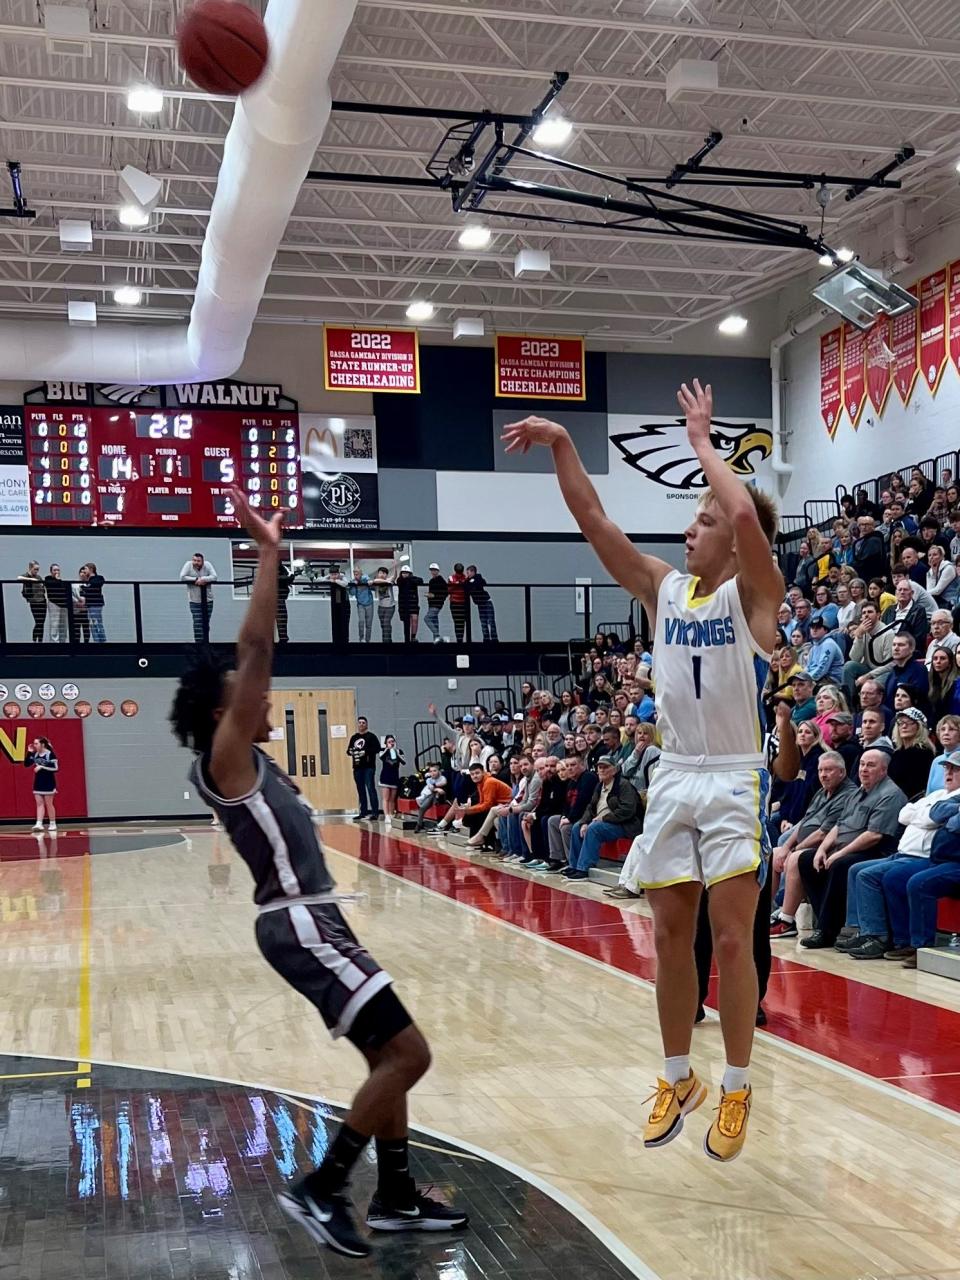 River Valley's Sawyer Weston shoots a 3-pointer during Wednesday's Division II boys basketball district semifinal game against Linden McKinley at Big Walnut.